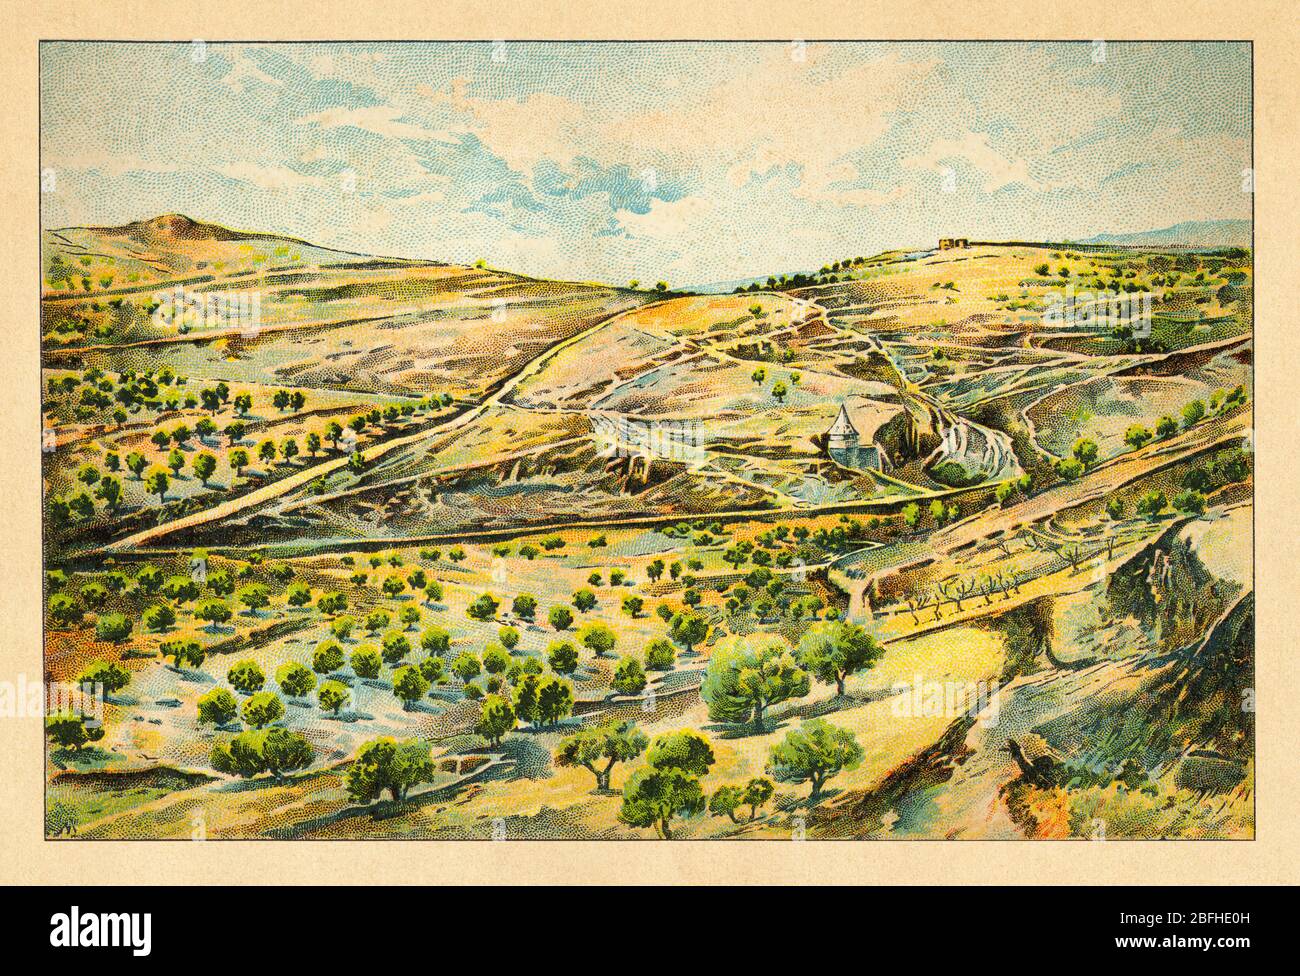 Landscape view valley of Jehoshaphat or Valley of Josaphat. Israel, old color chromolithography The Holy Land 1898 Stock Photo